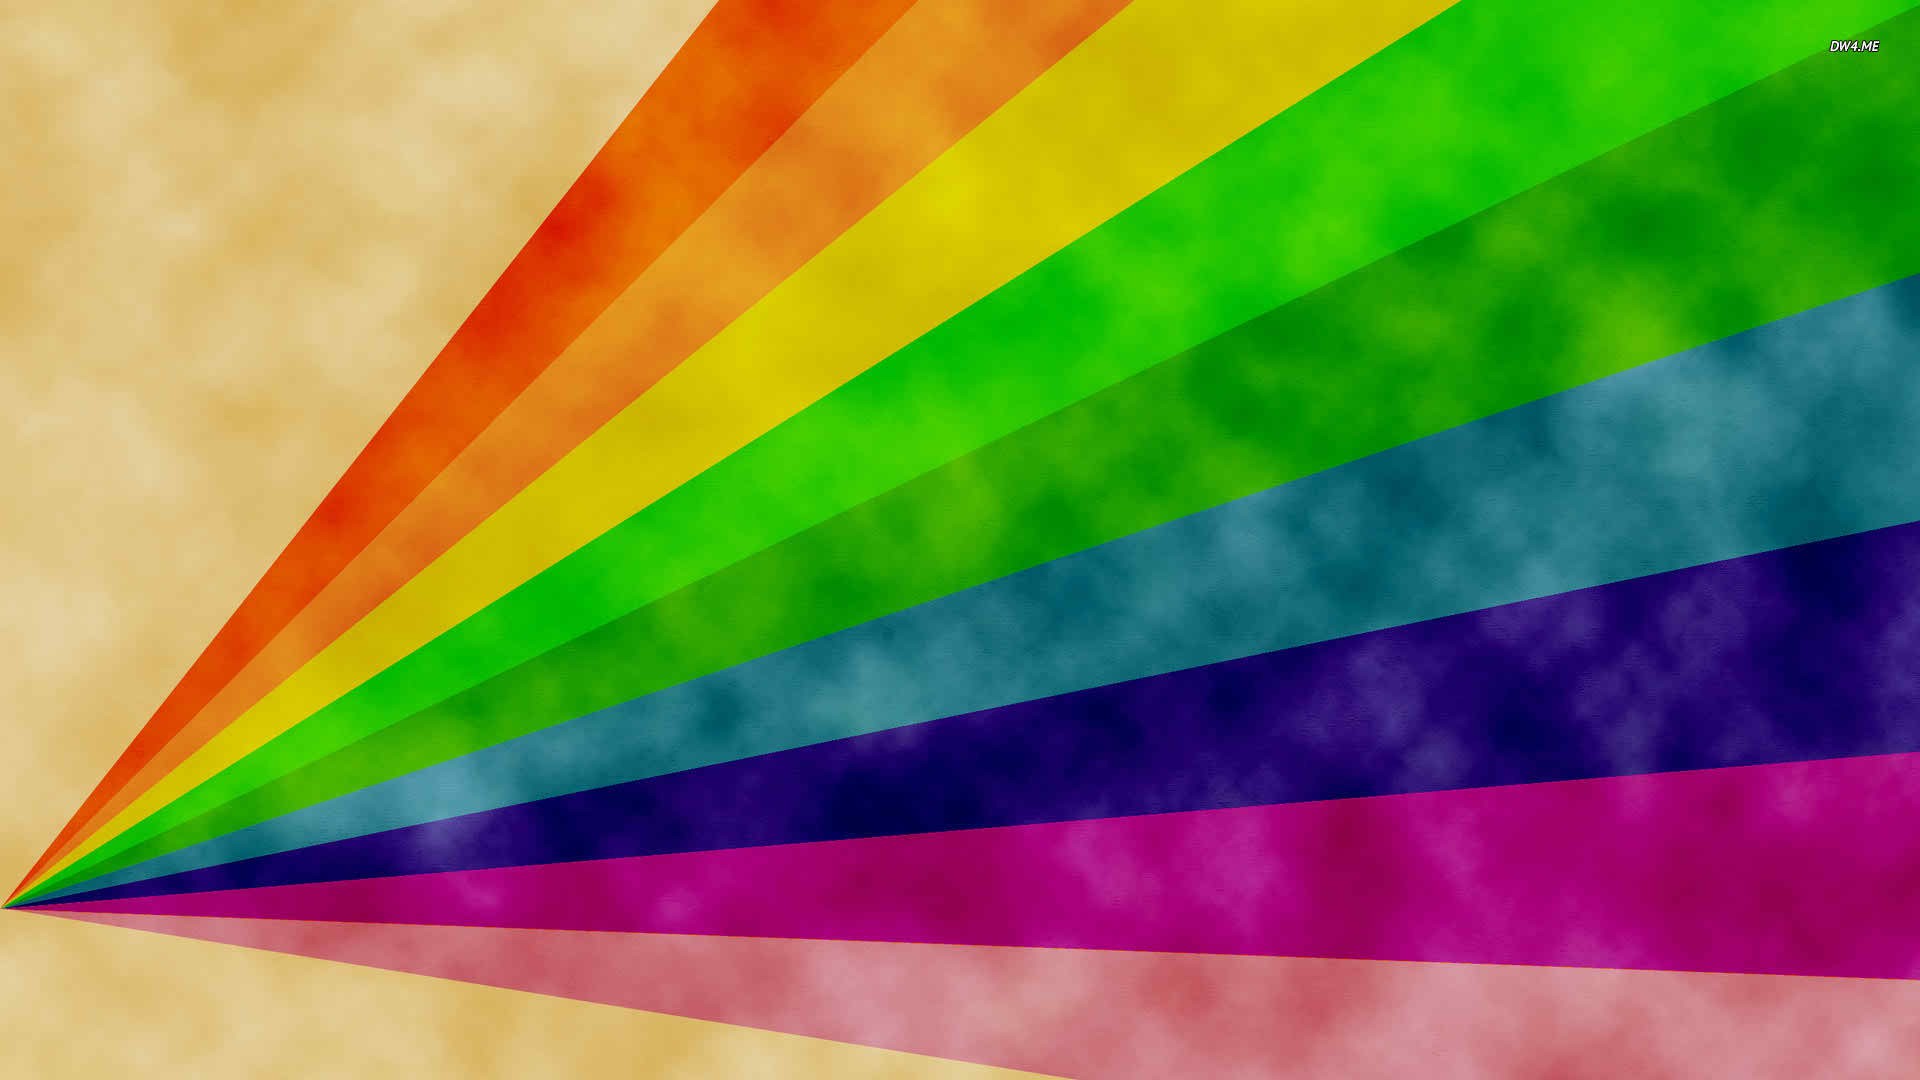 Rainbow Colors Background Wallpaper HD with image resolution 1920x1080 pixel. You can make this wallpaper for your Desktop Computer Backgrounds, Mac Wallpapers, Android Lock screen or iPhone Screensavers